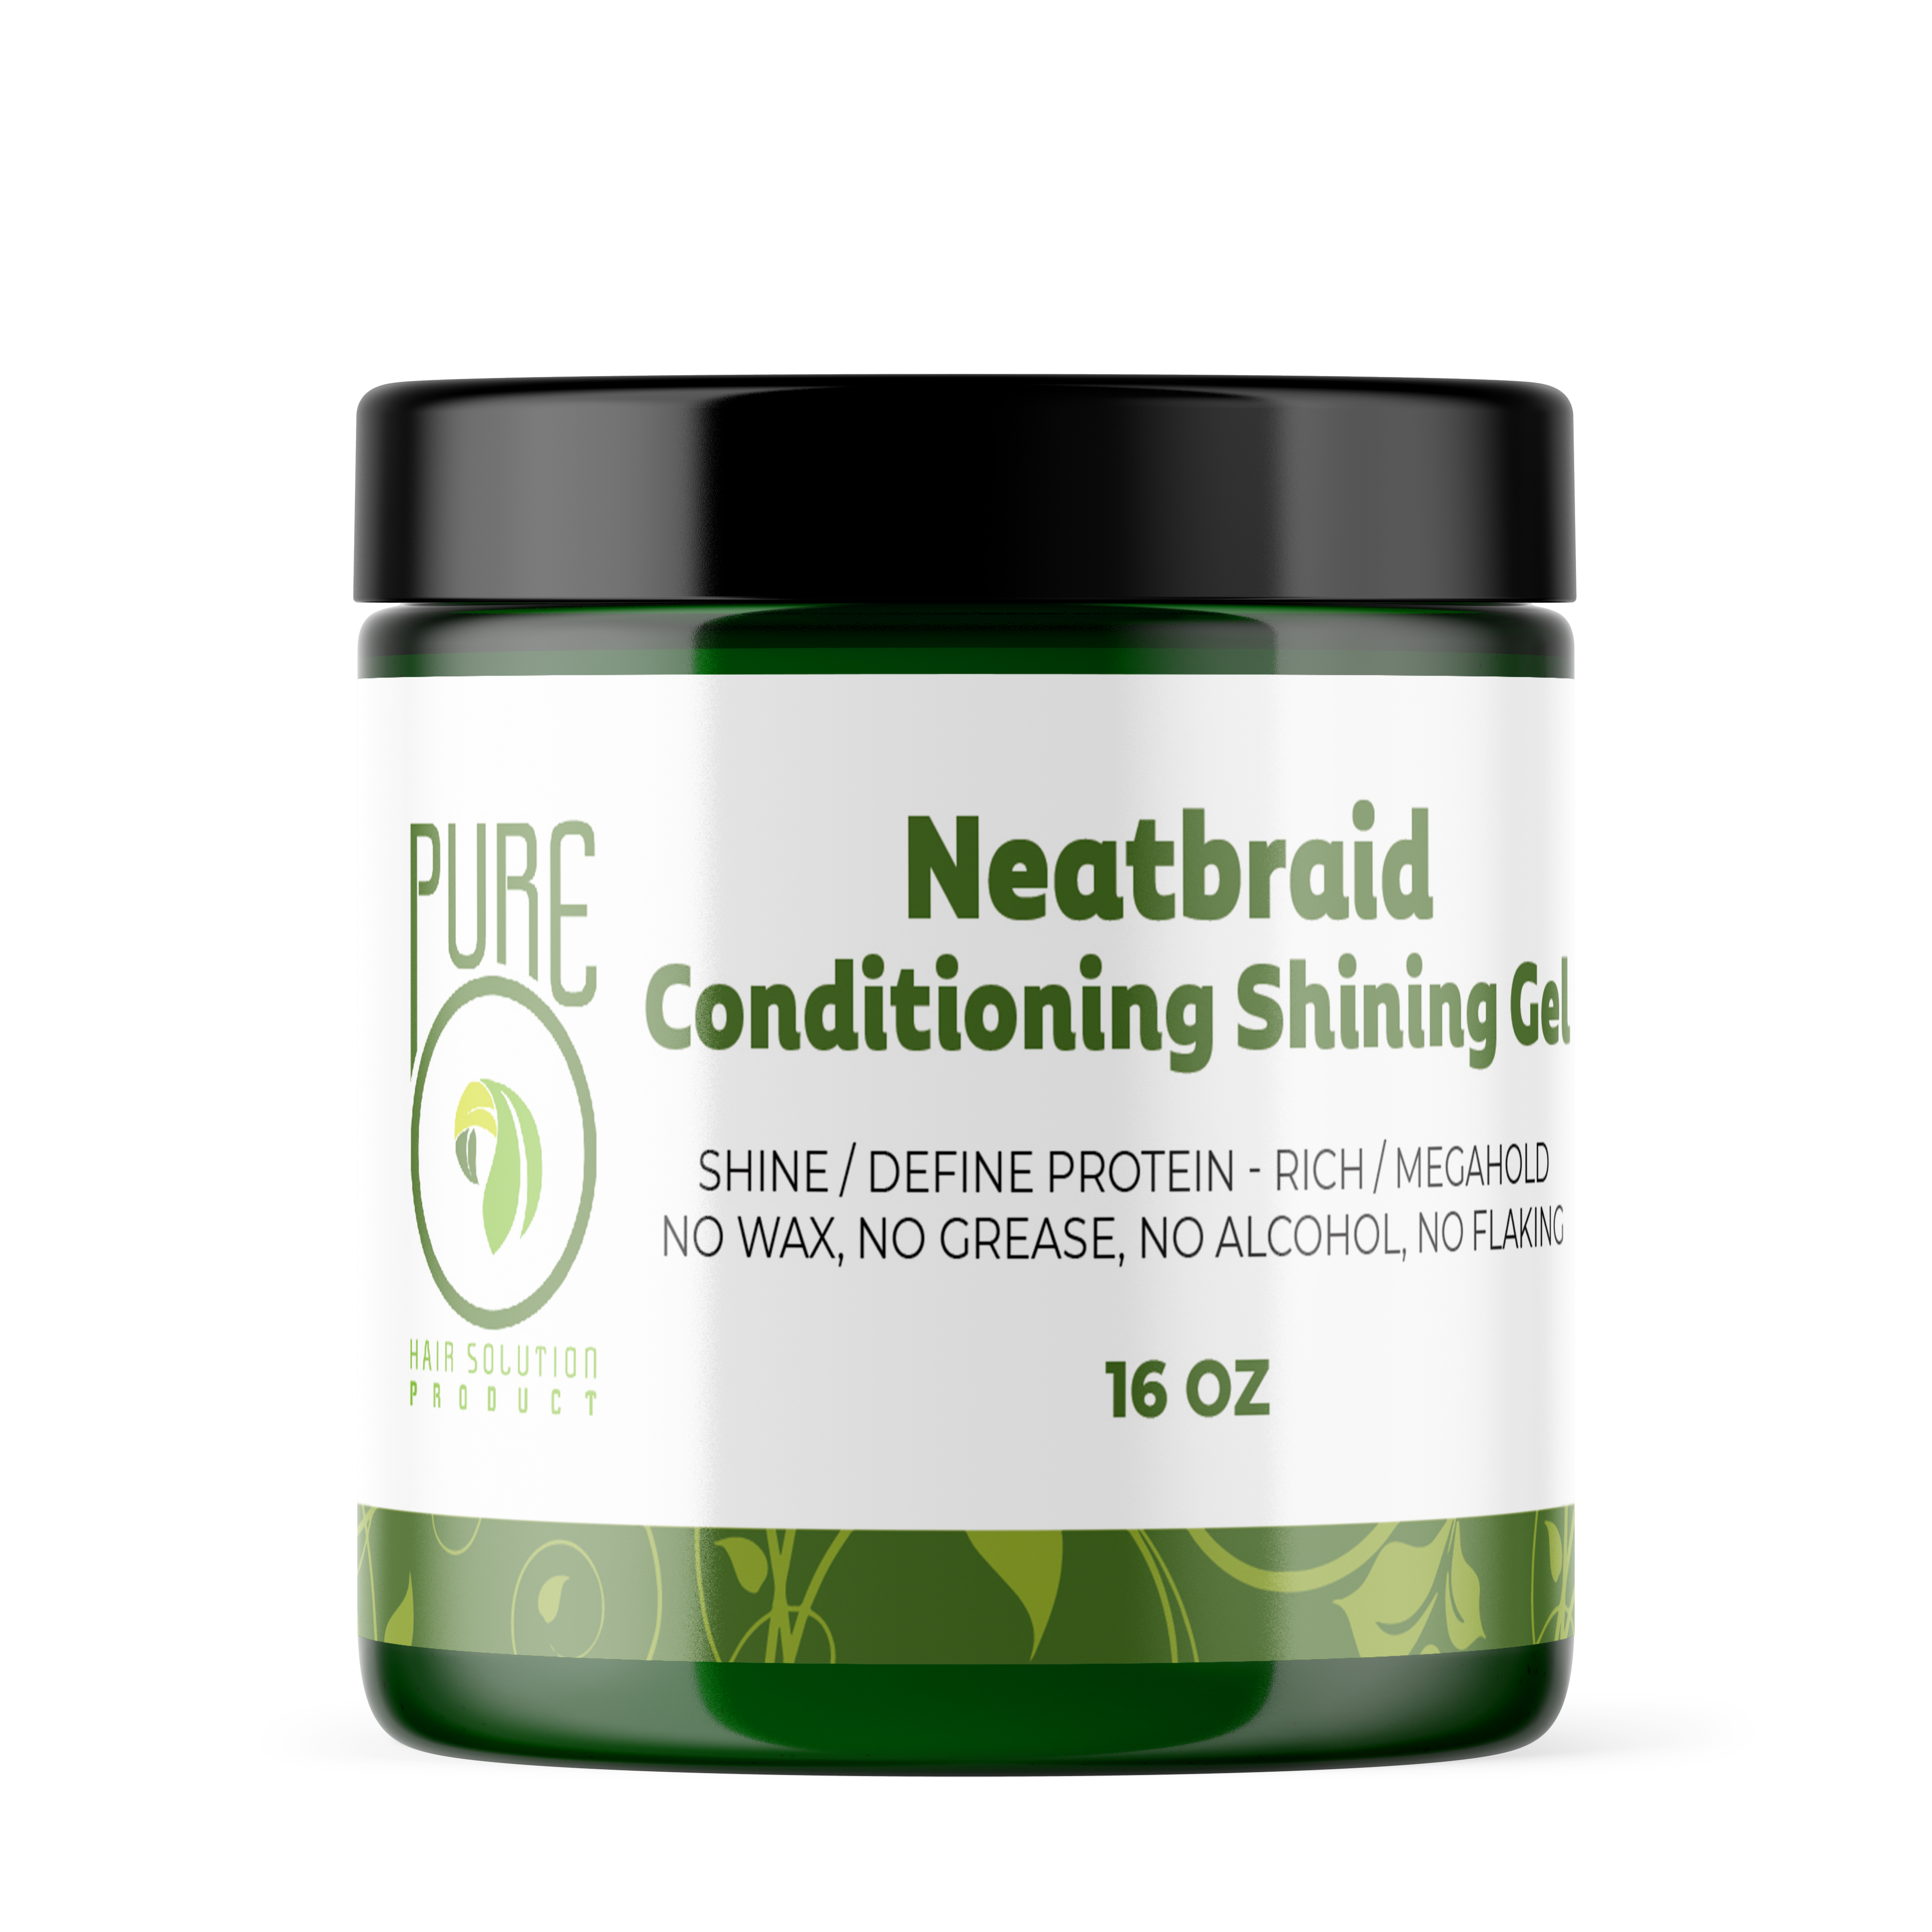 Pure O Natural Neat Braid Conditioning Shining Gel 64 oz